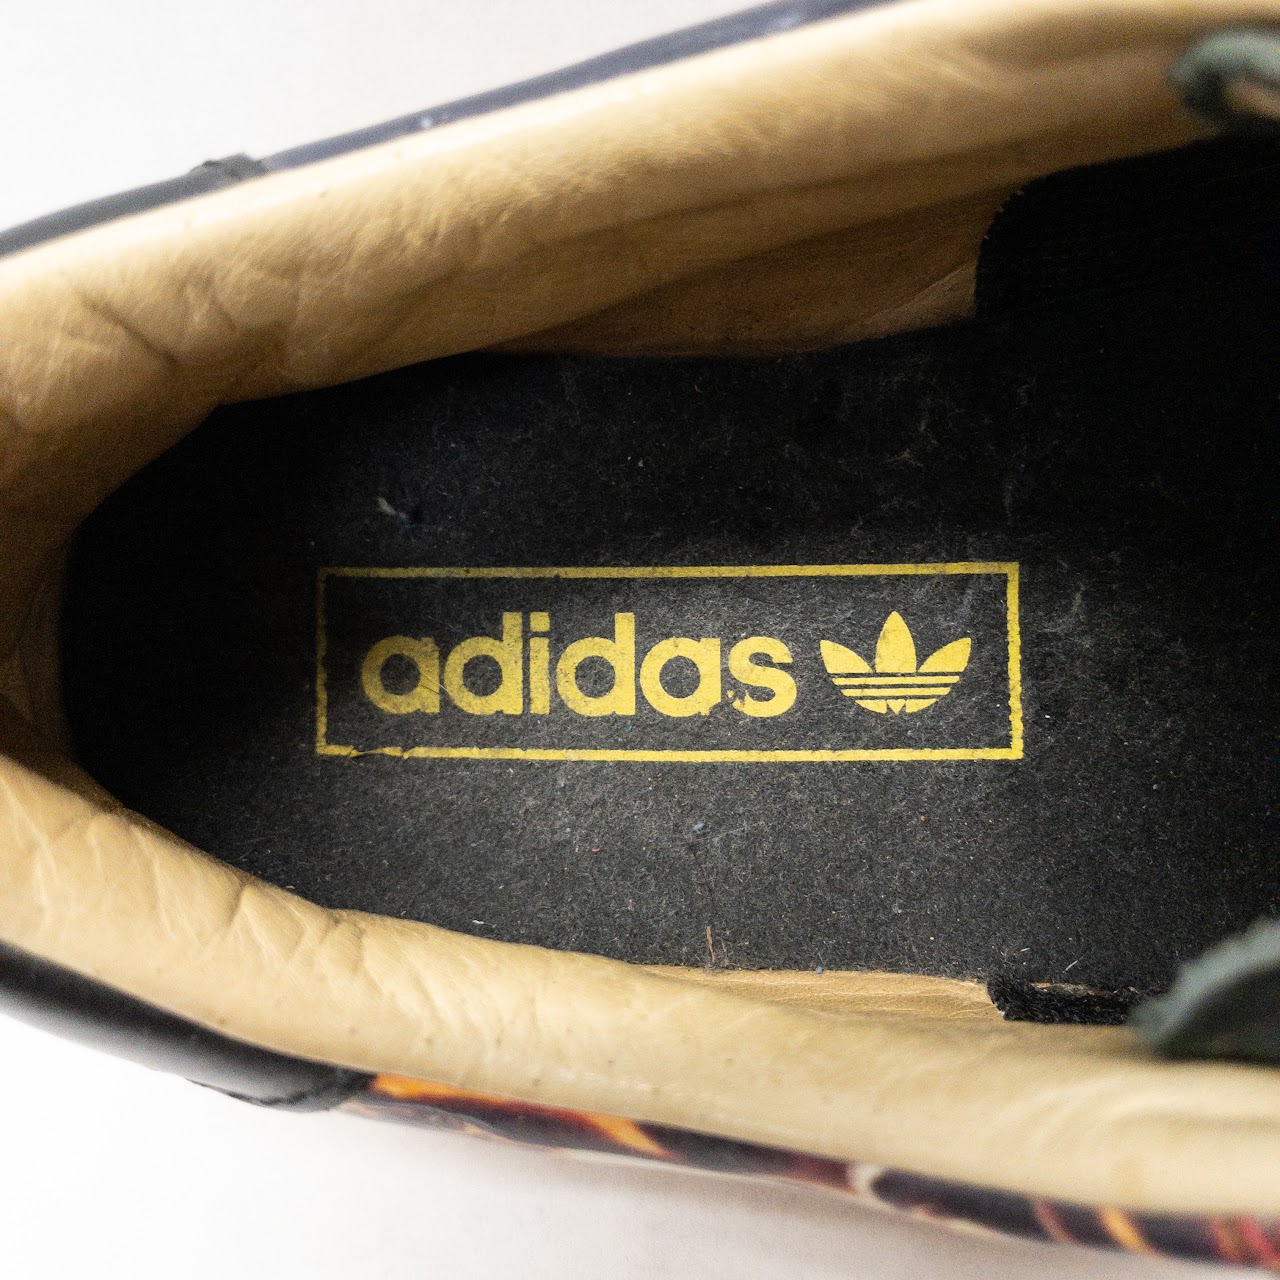 Adidas x Muhammad Ali Limited Edition Sneakers